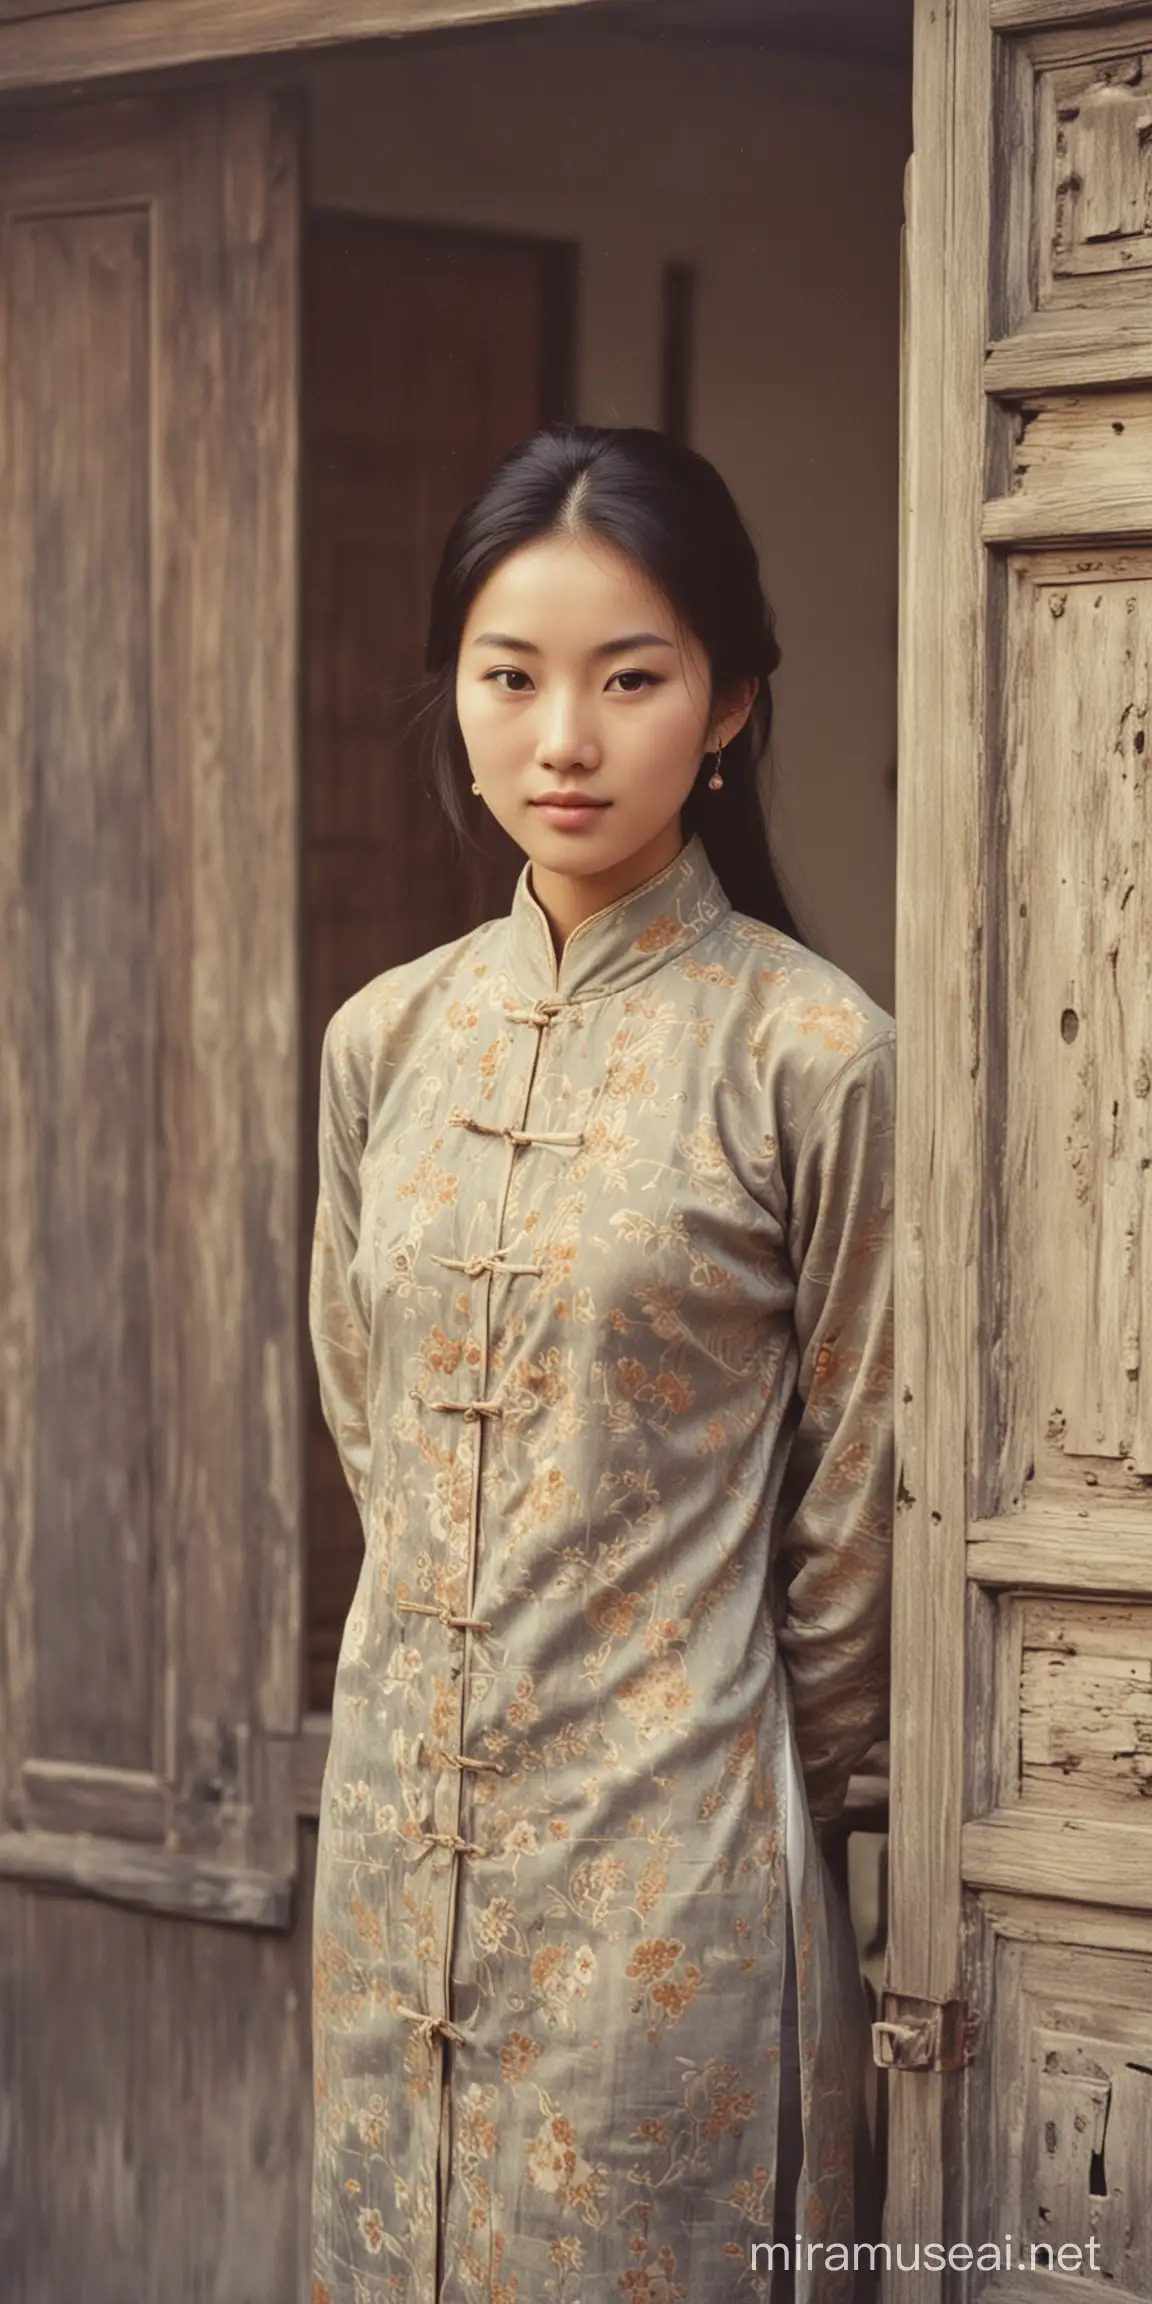 Vintage Portrait of an Elegant Chinese Woman at the Entrance of a Traditional House in 1970s China